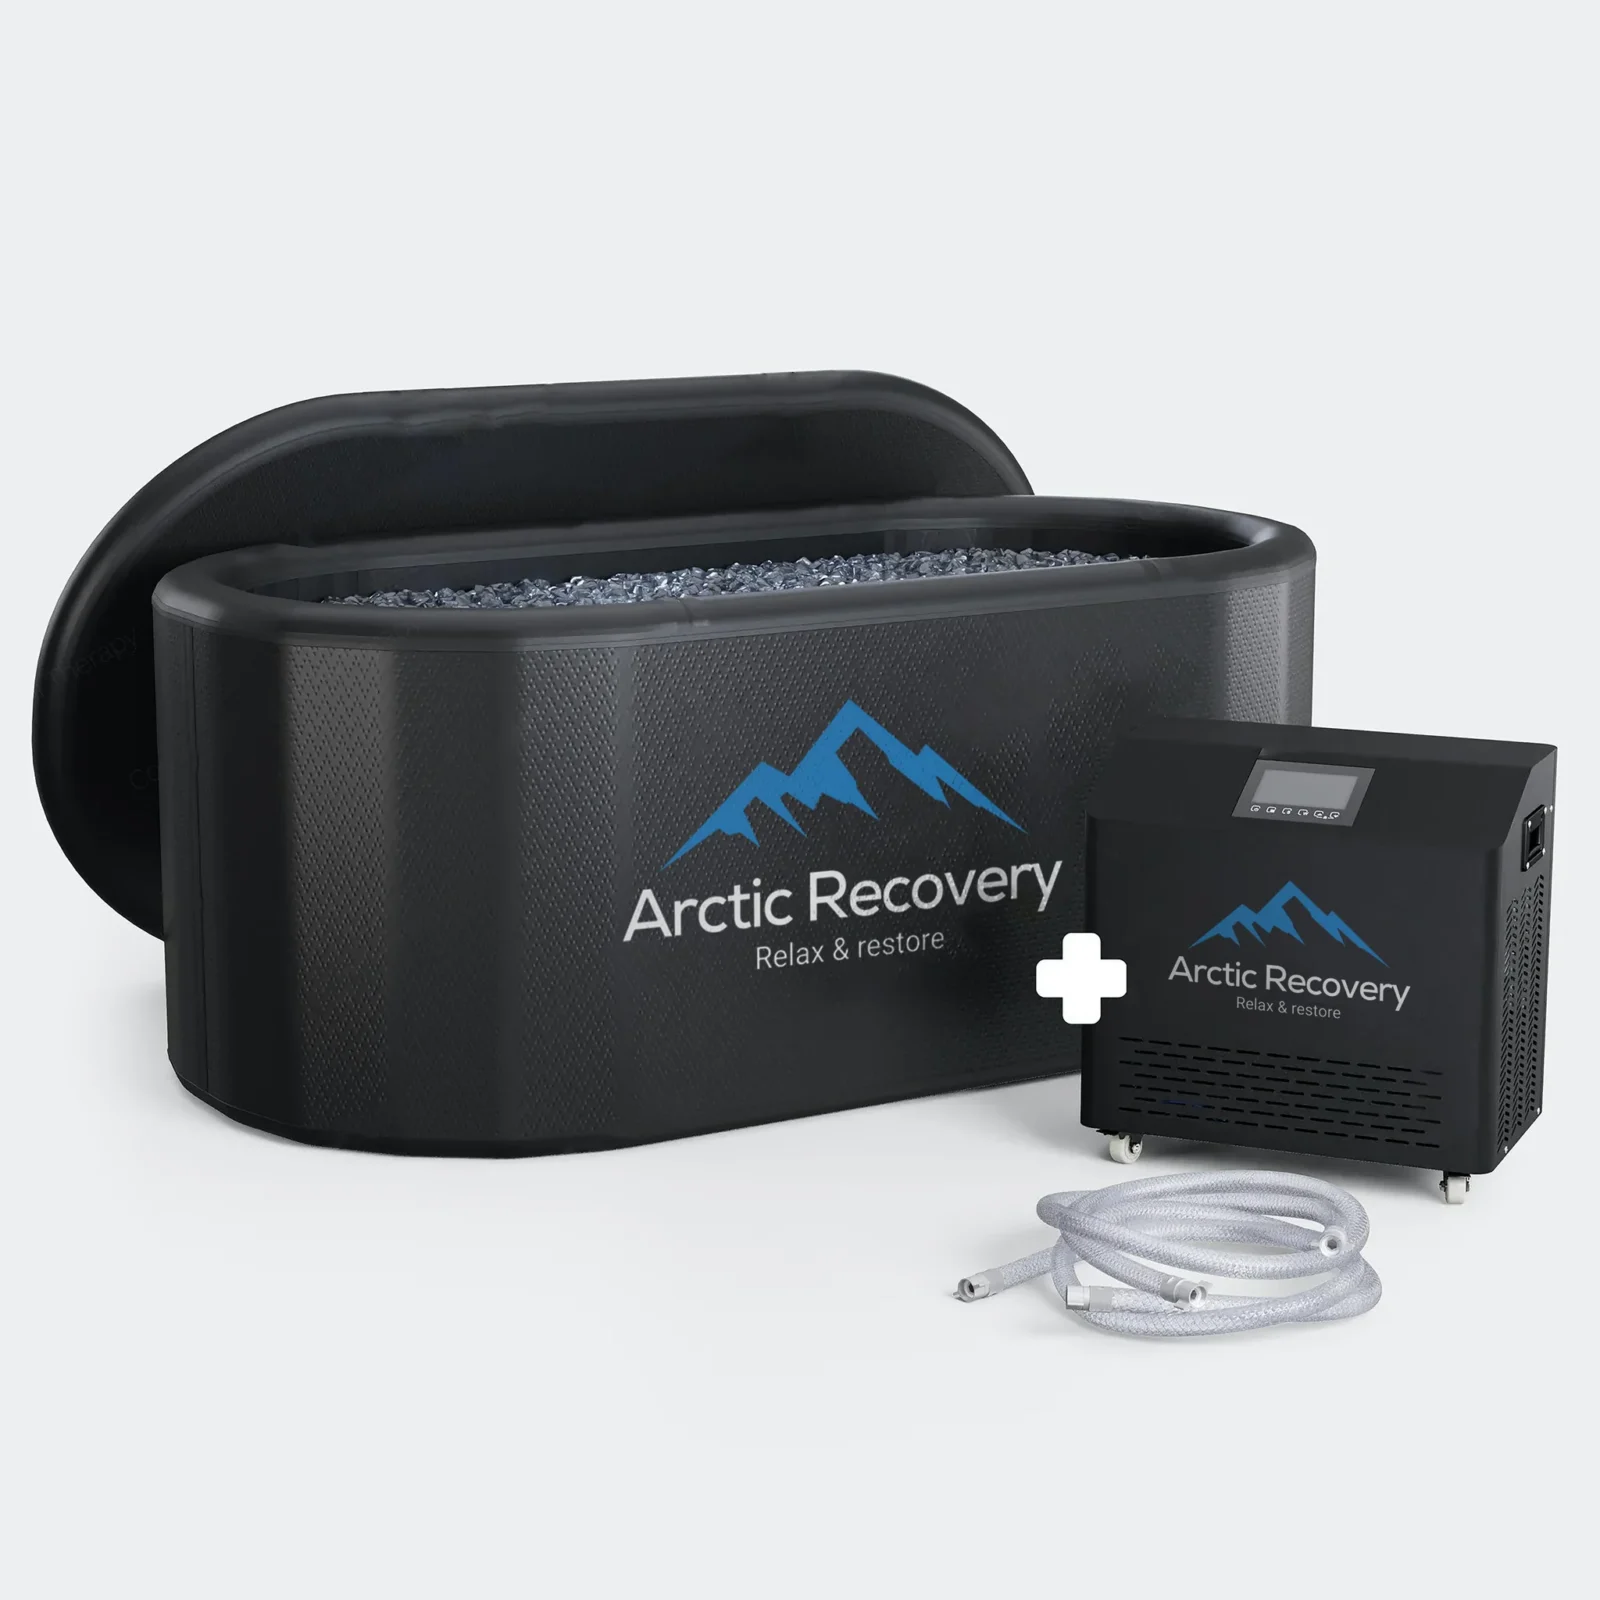 Arctic Recovery Ice Tub Pro Prime<br />
